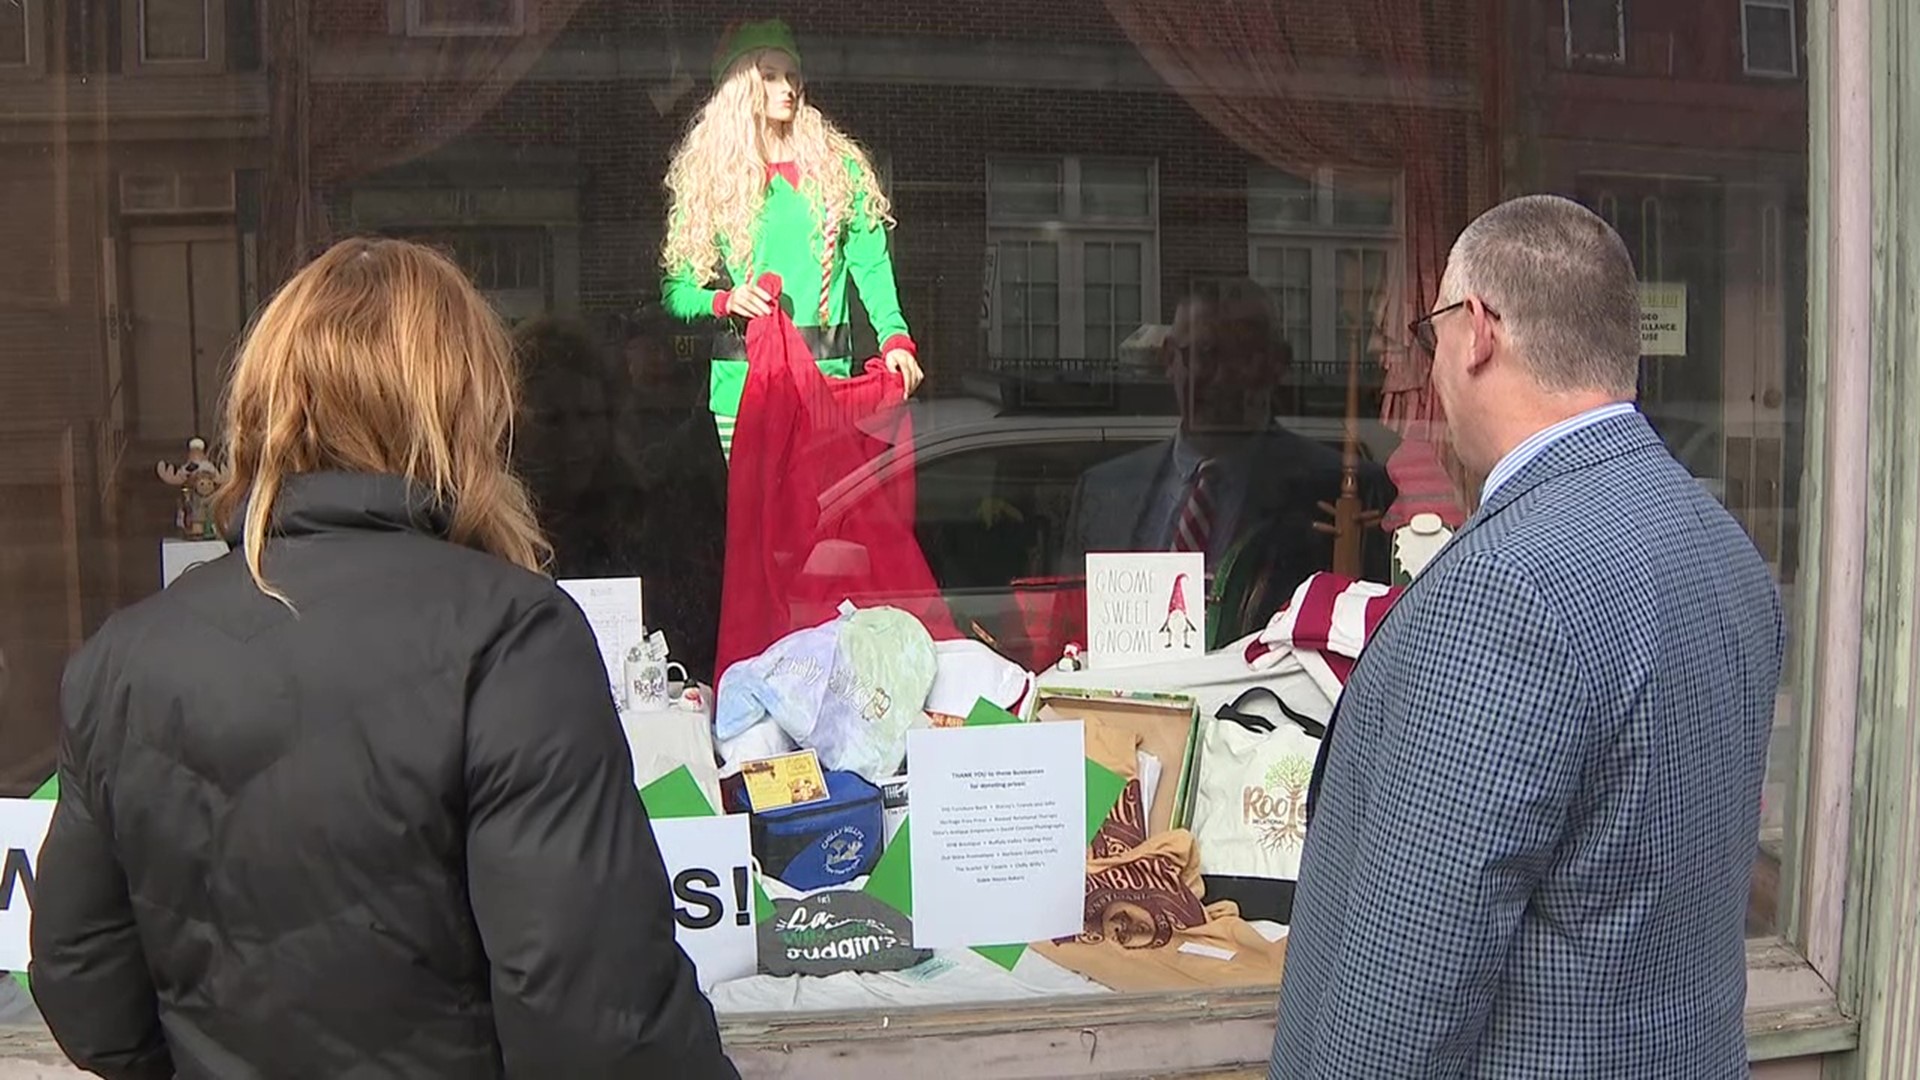 The promotion aims to bring people to downtown Mifflinburg and a lucky shopper could win the contents of the store window.